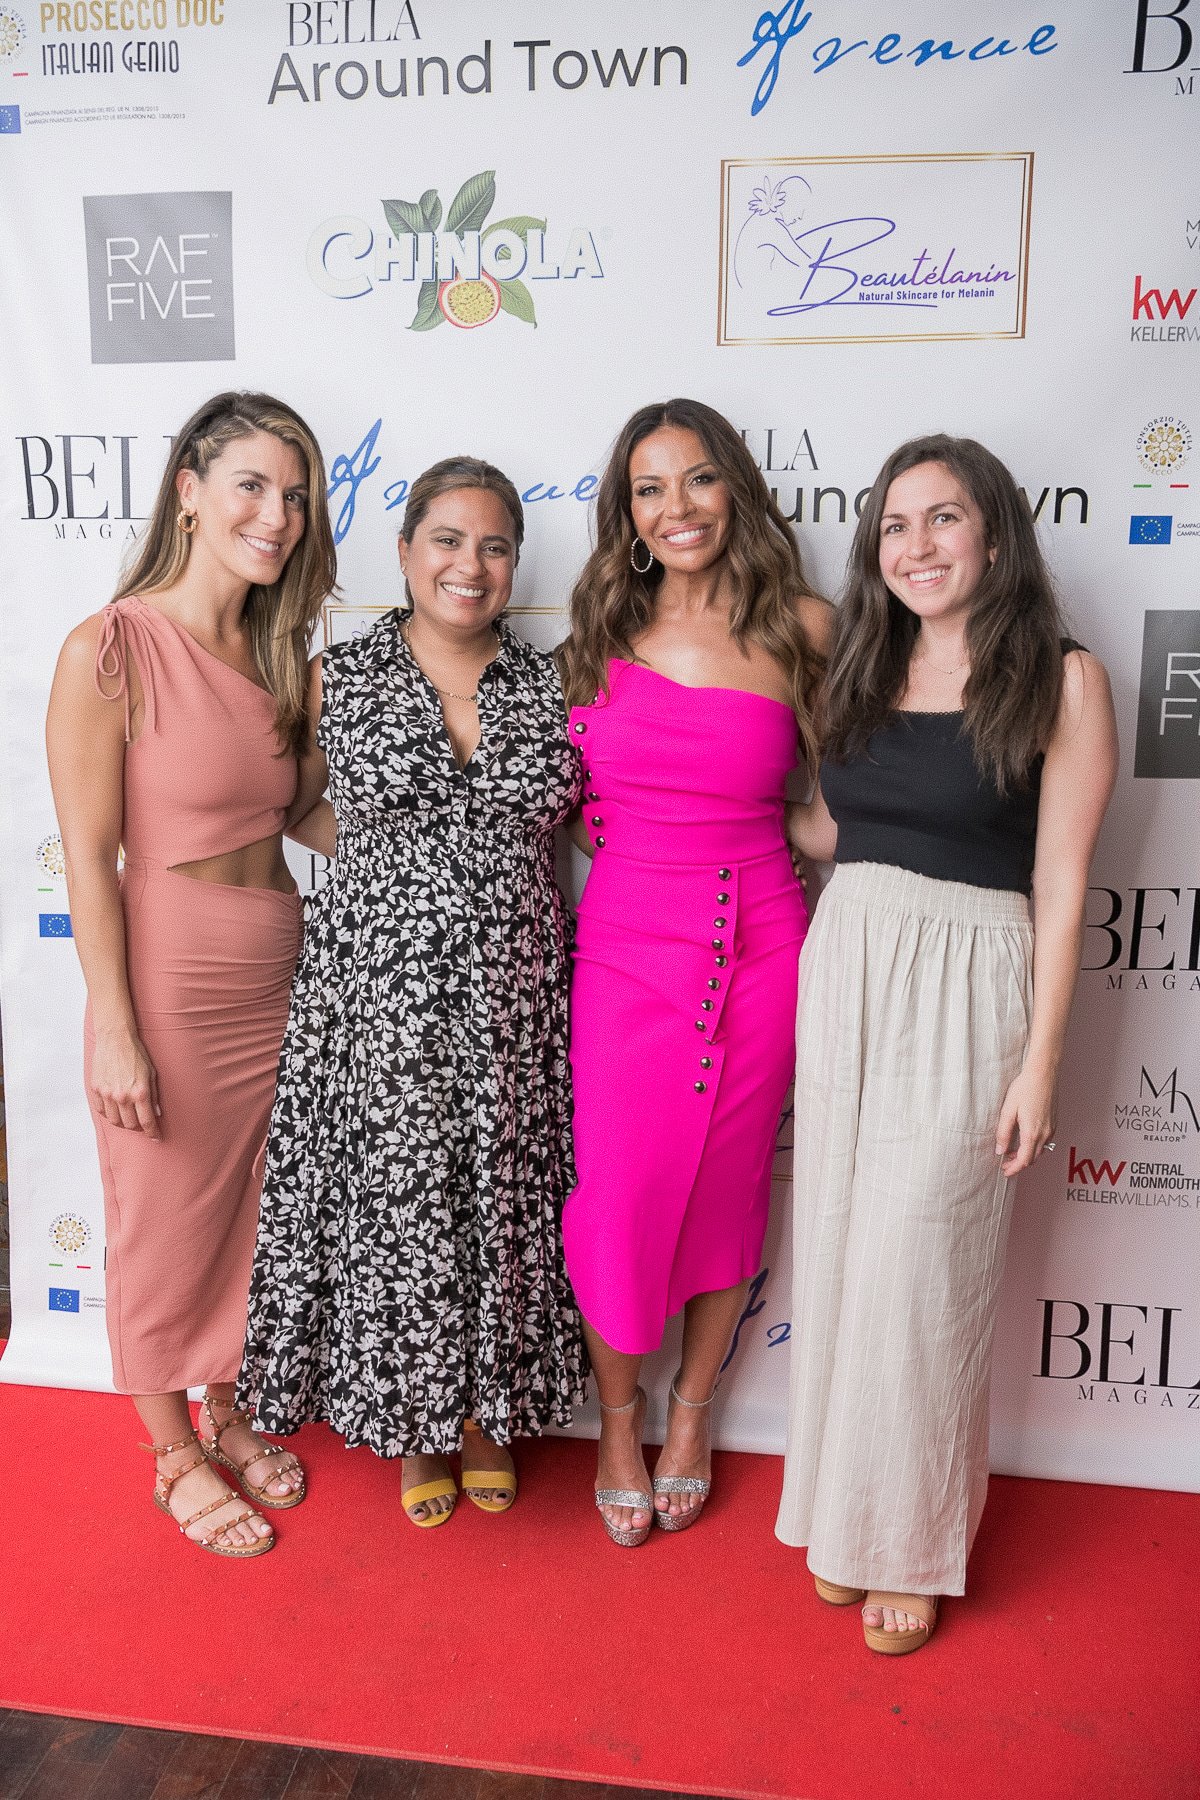 BELLA-MAGAZINE-Summer-Issue-Cover-Party-Avenue-Long-Branch-227.jpg